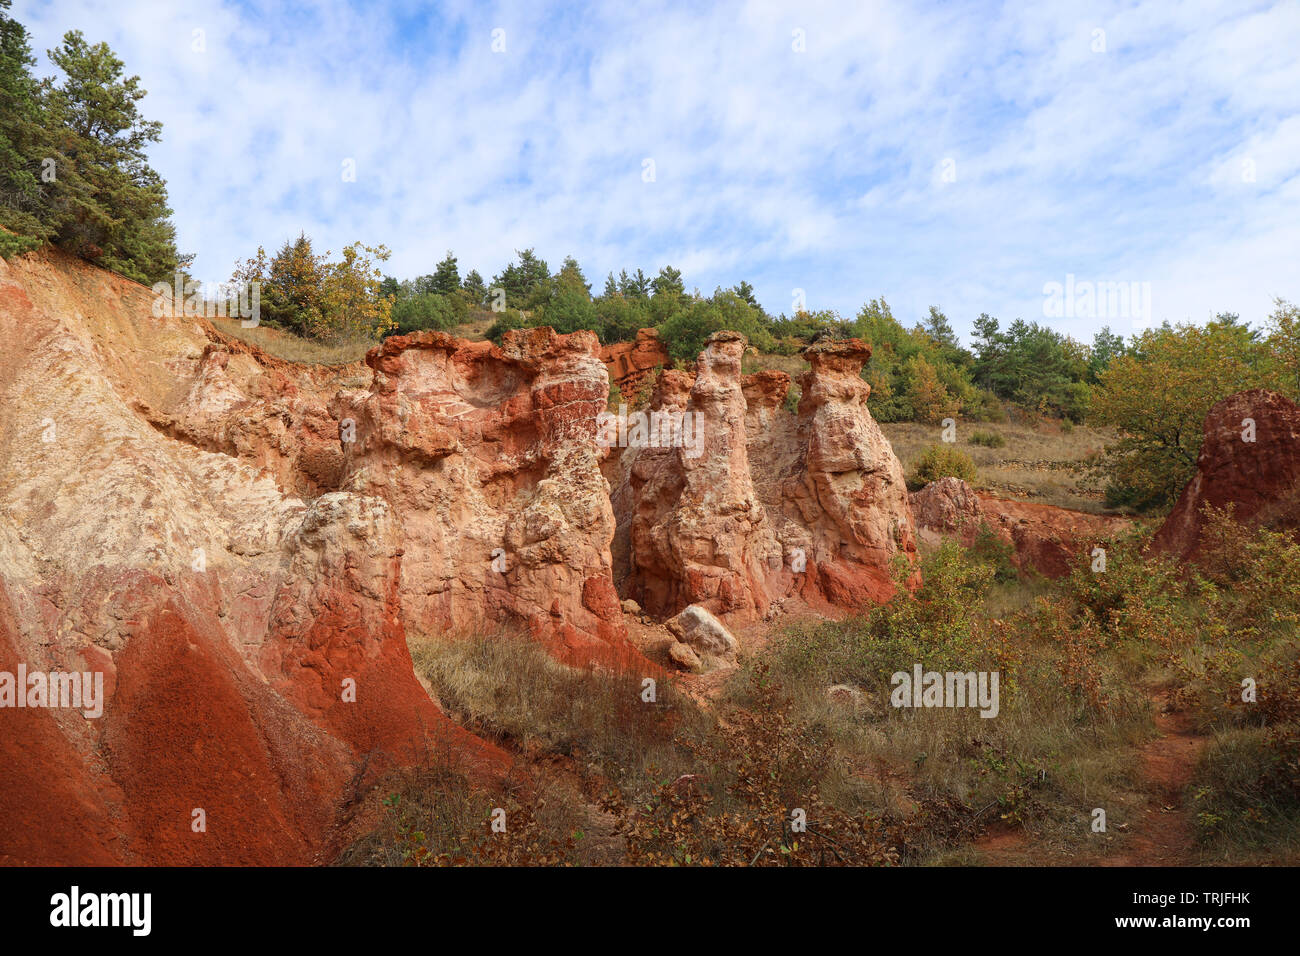 The “ vallee des saints “ is a famous geological formation situated in Auvergne, France Stock Photo